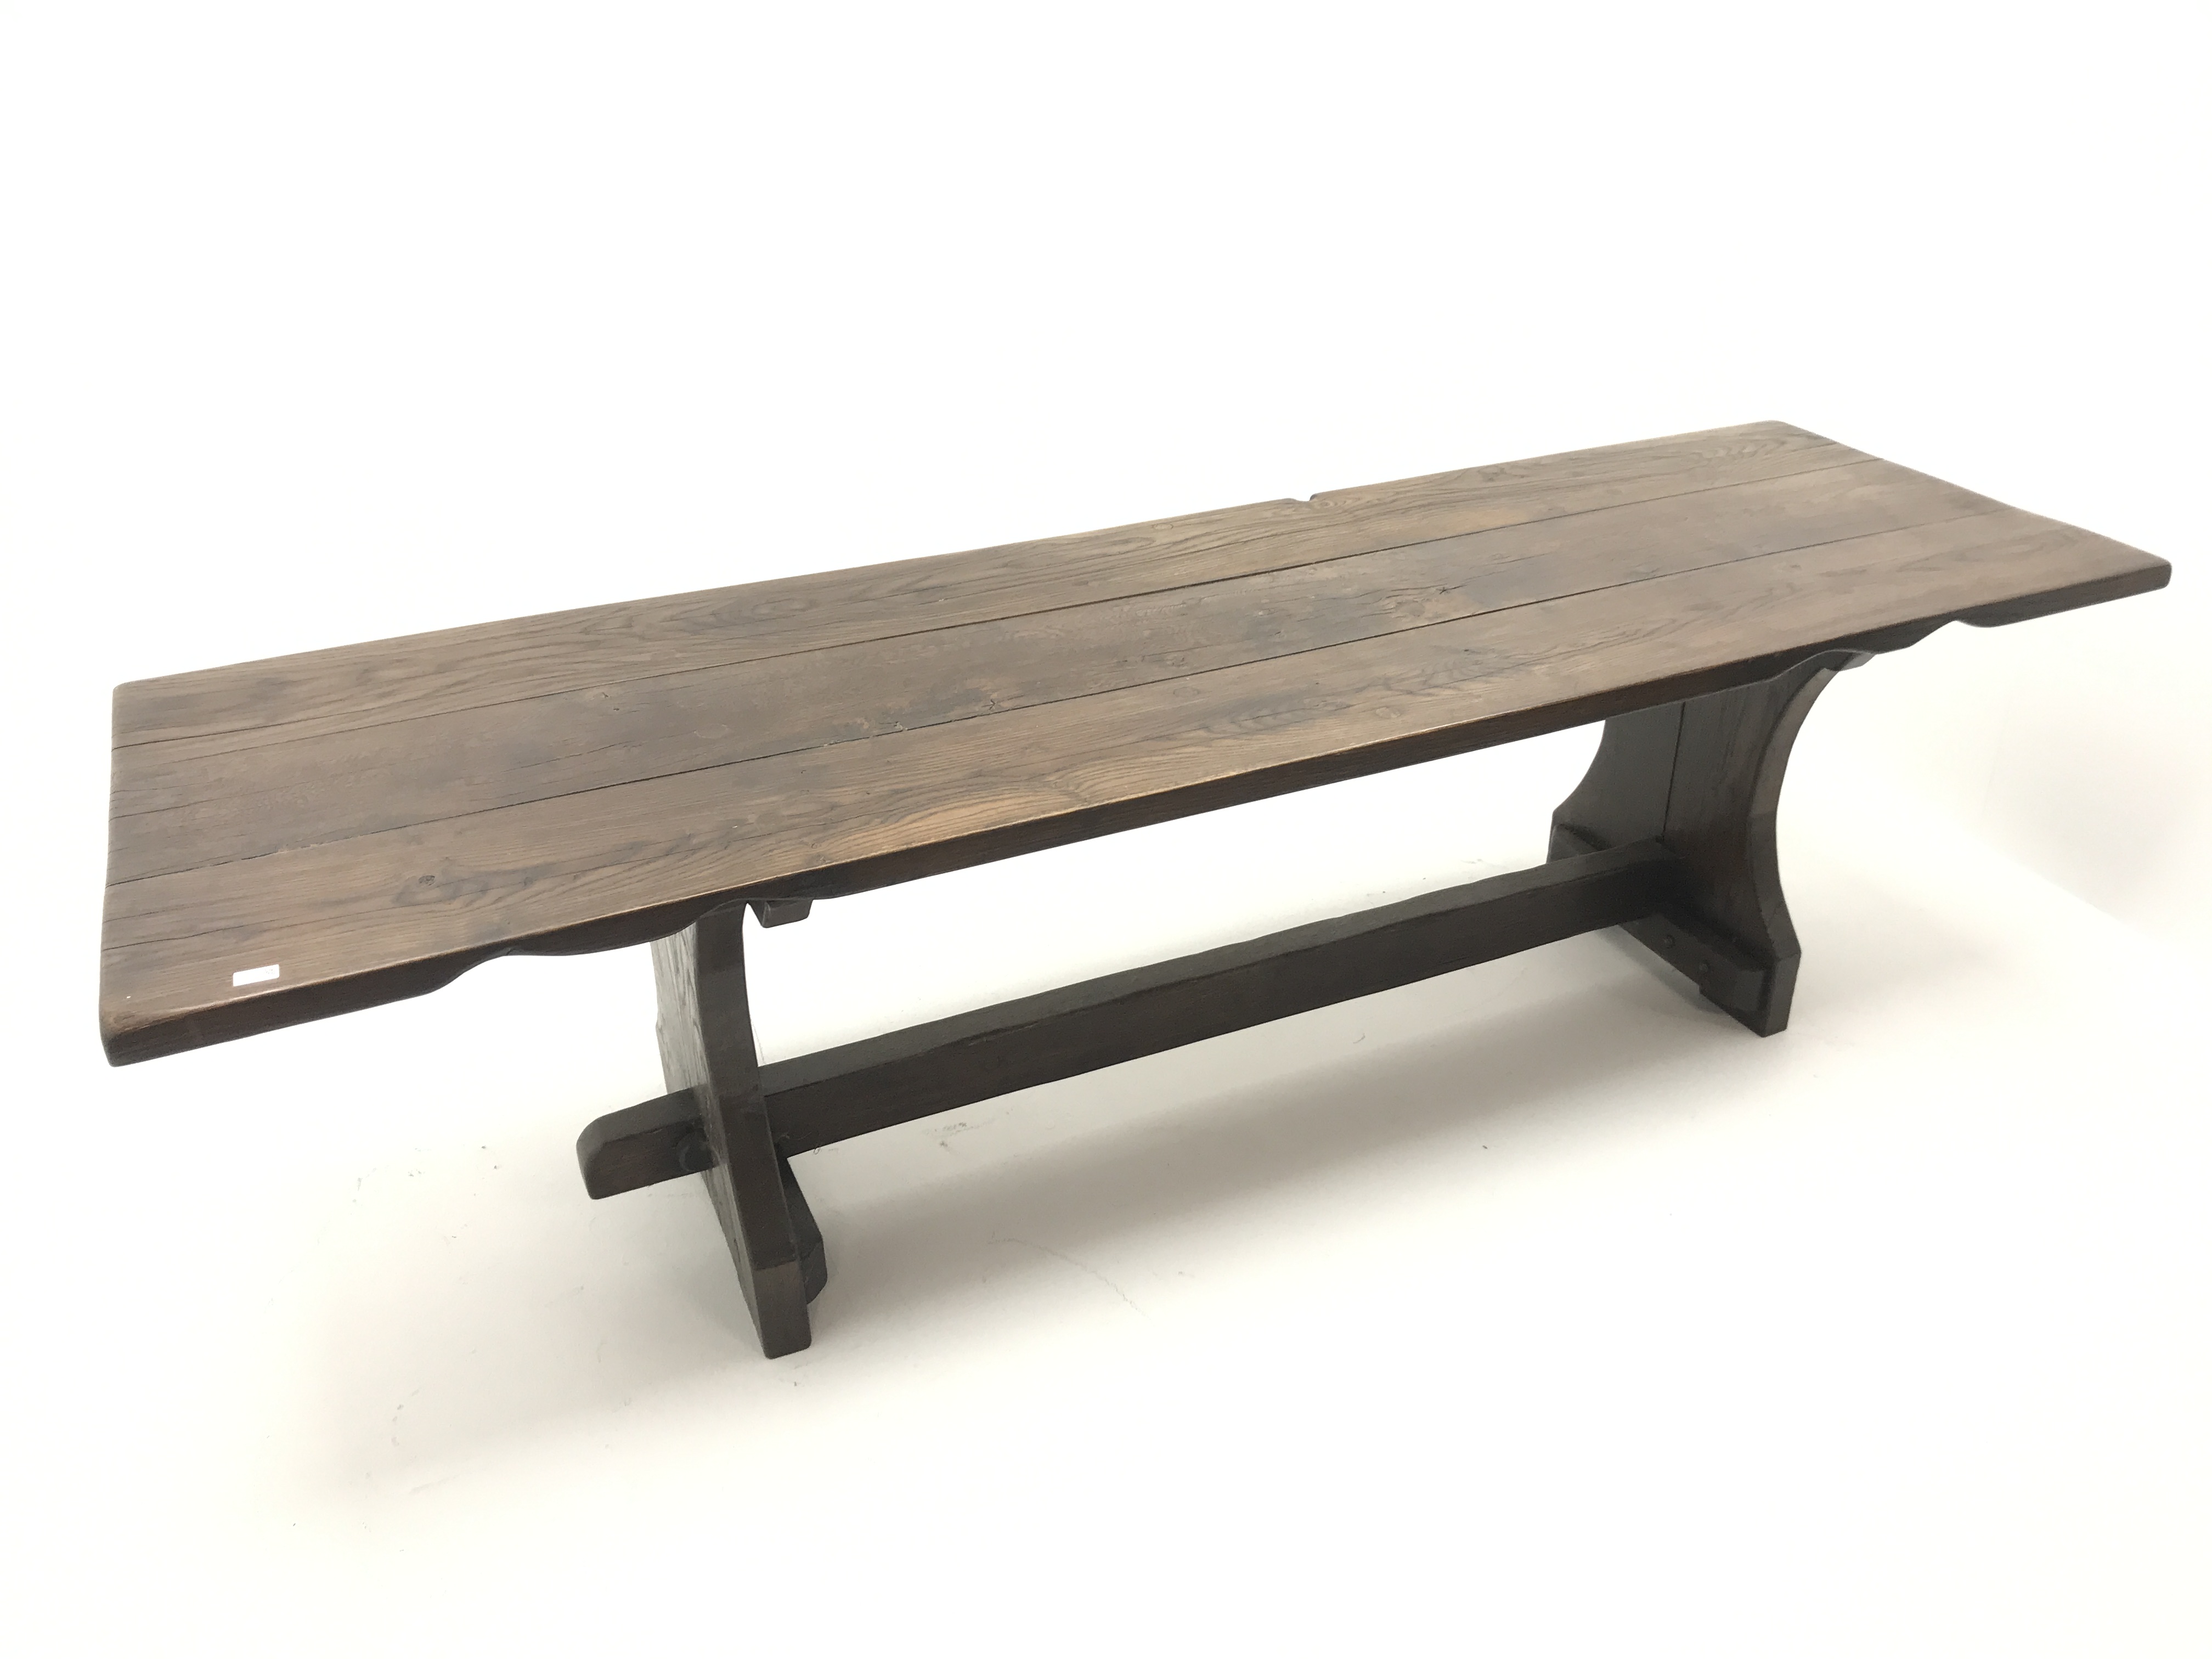 17th century style oak refectory dining table, planked top, - Image 4 of 5